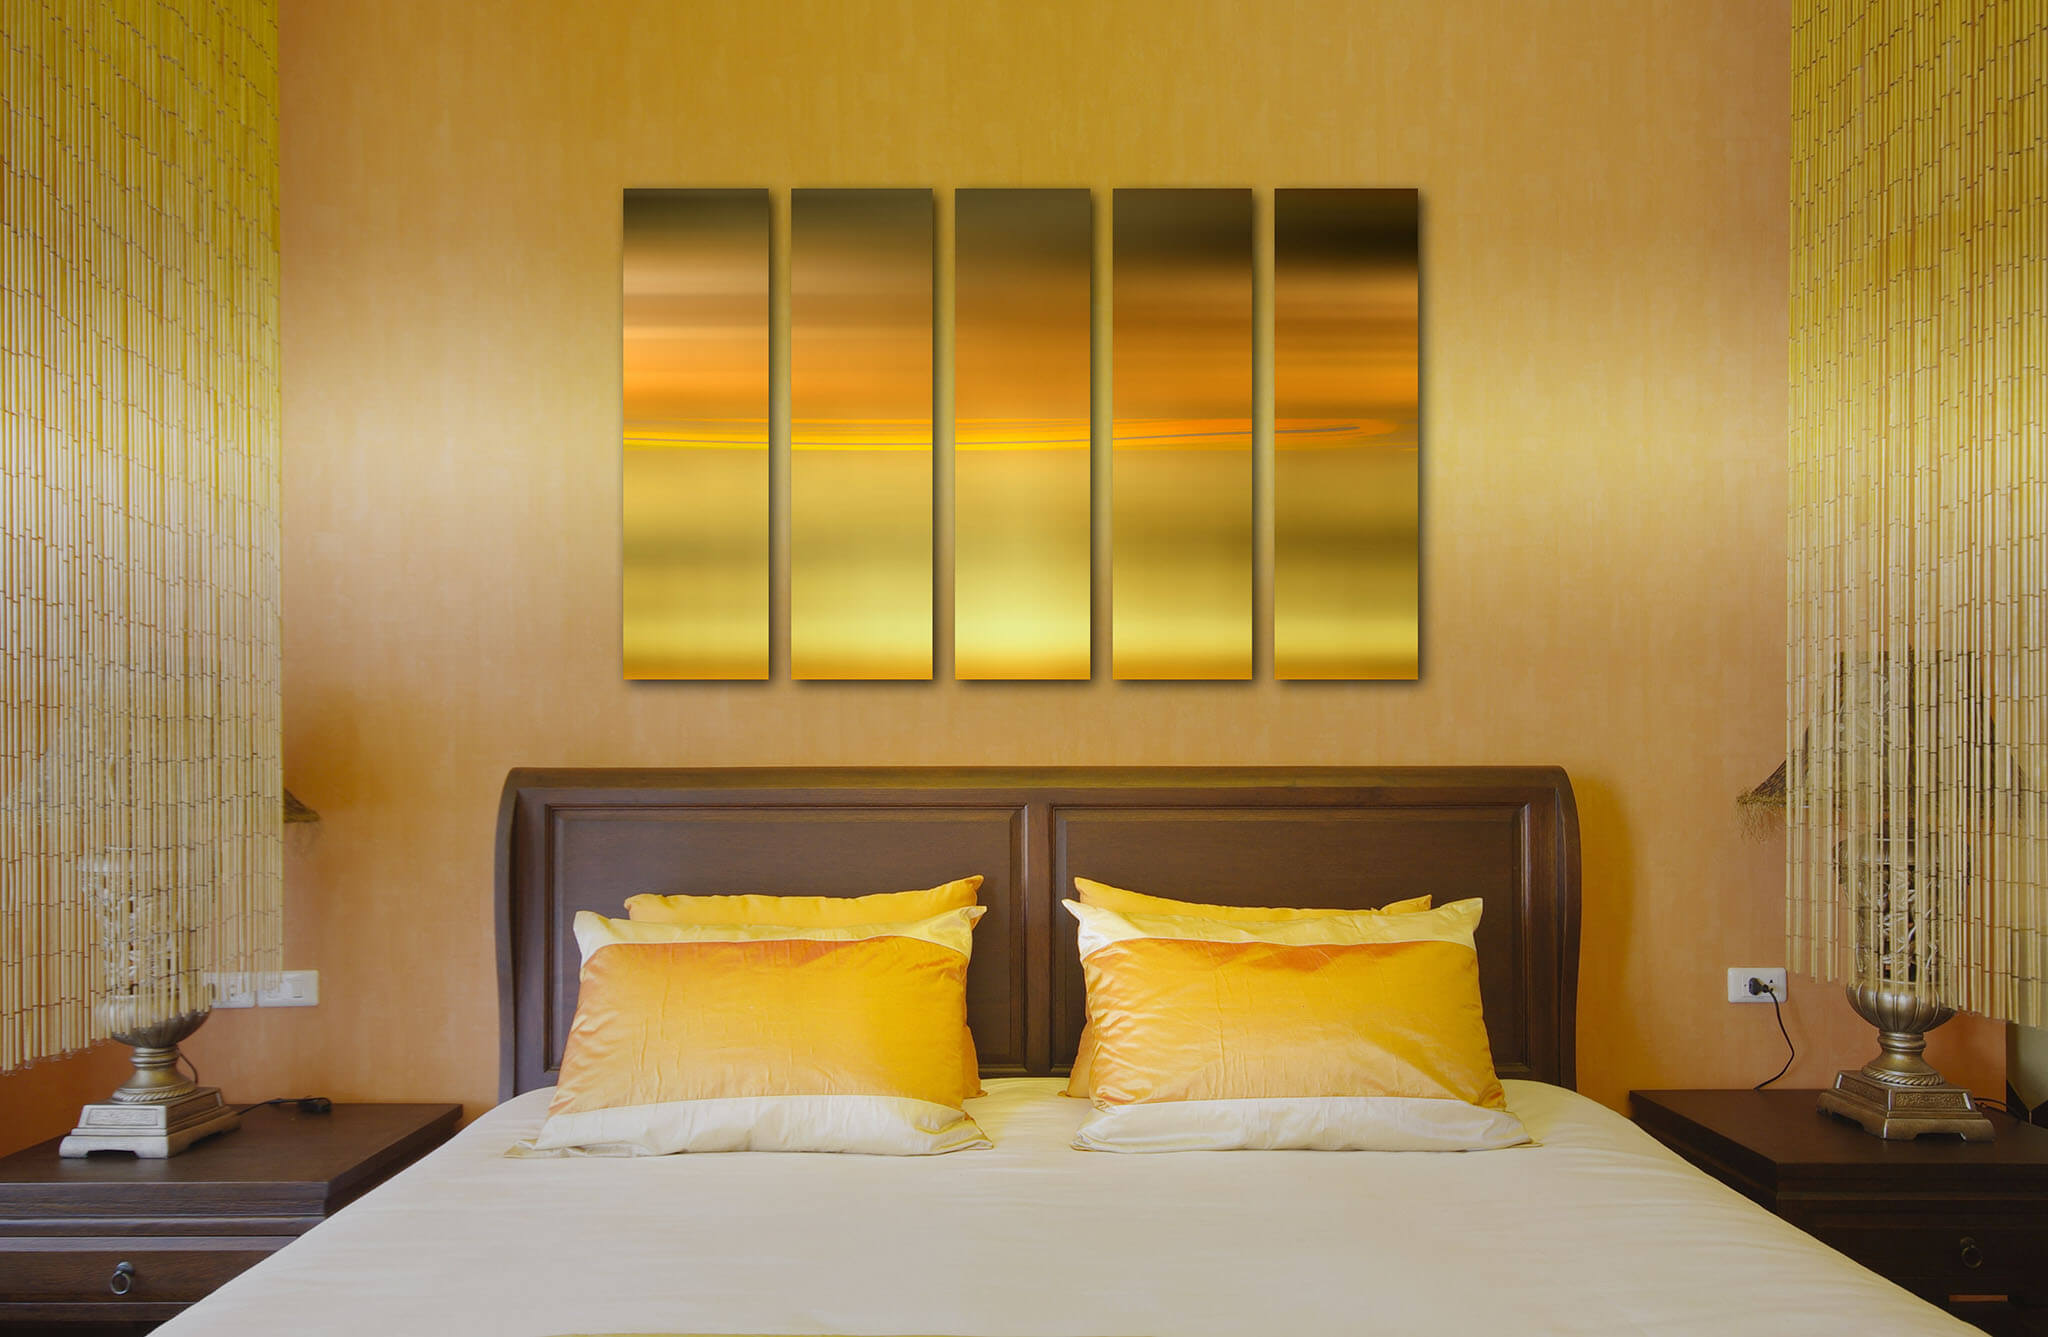 5-Panel Yellow Artwork Over Bed